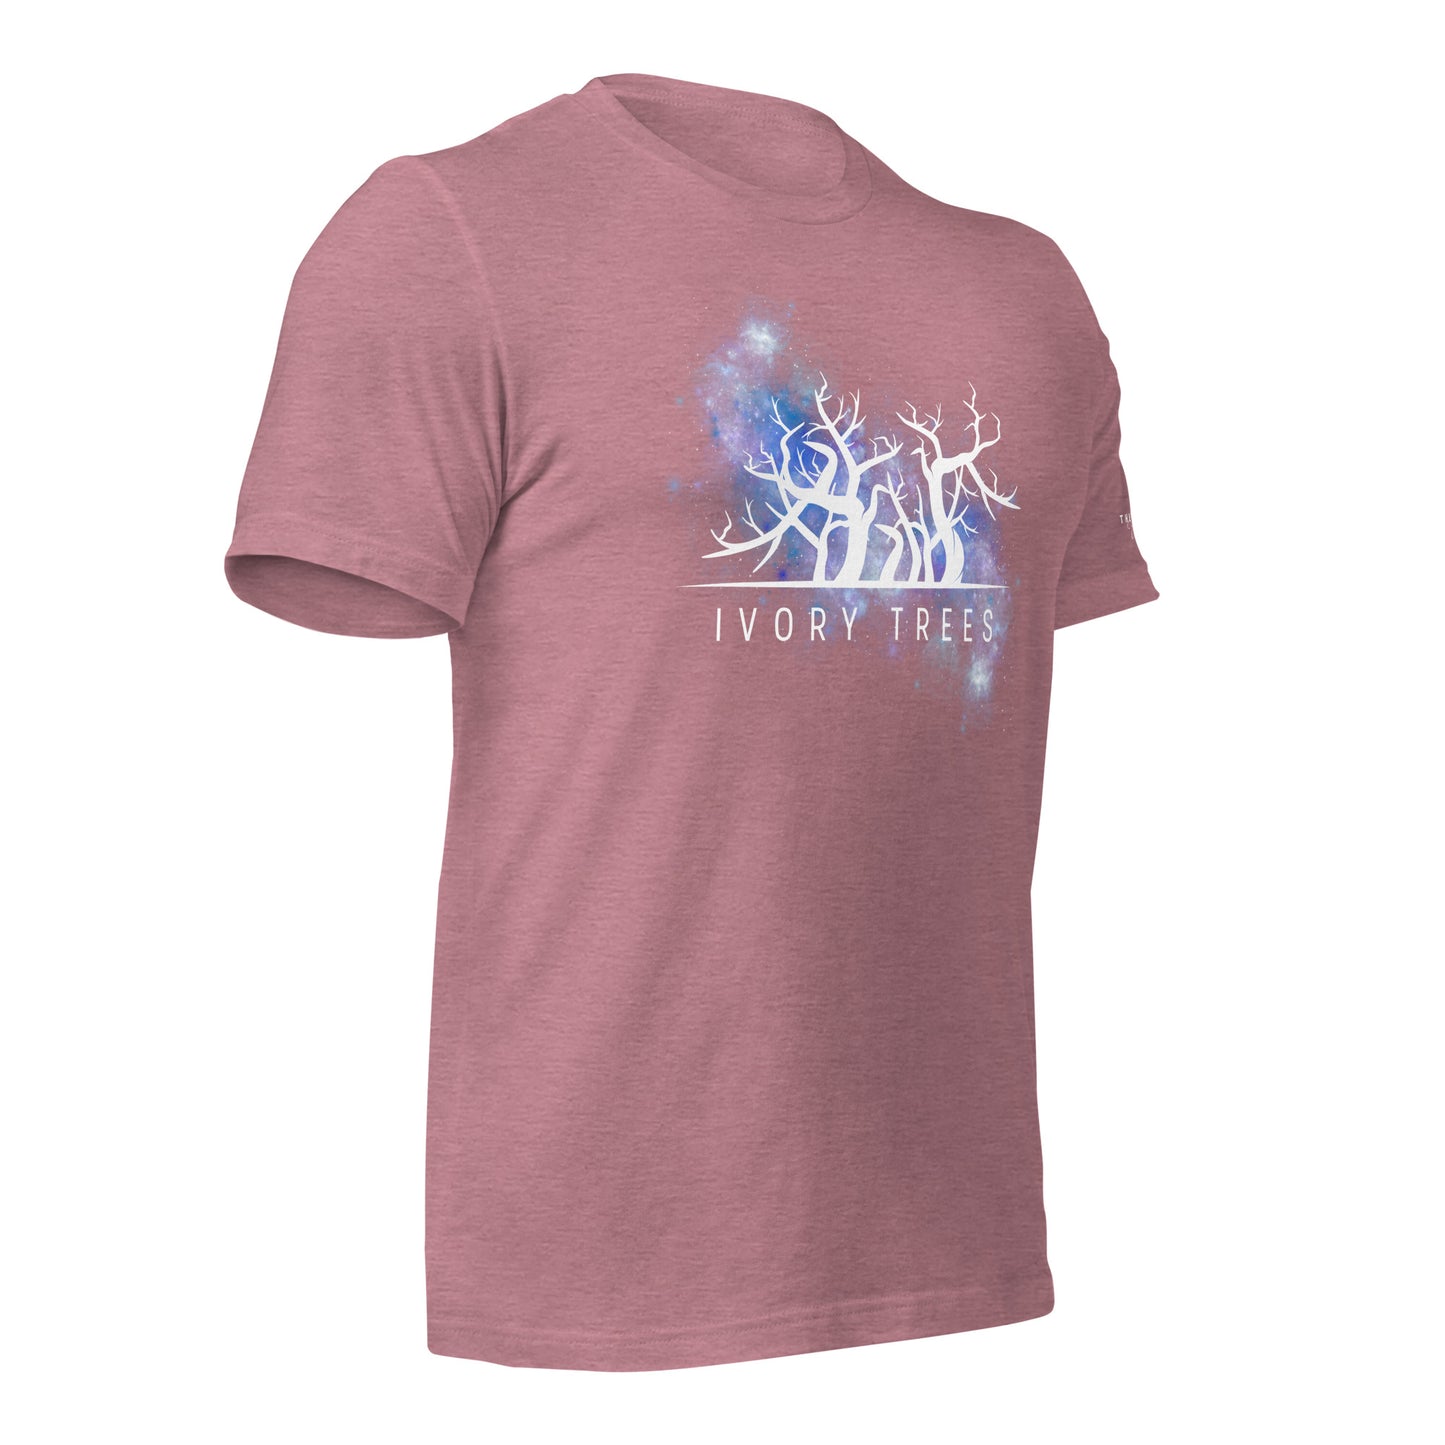 IVORY TREES NEBULA T-Shirt - The Diving Universe by Kristine Kathryn Rusch